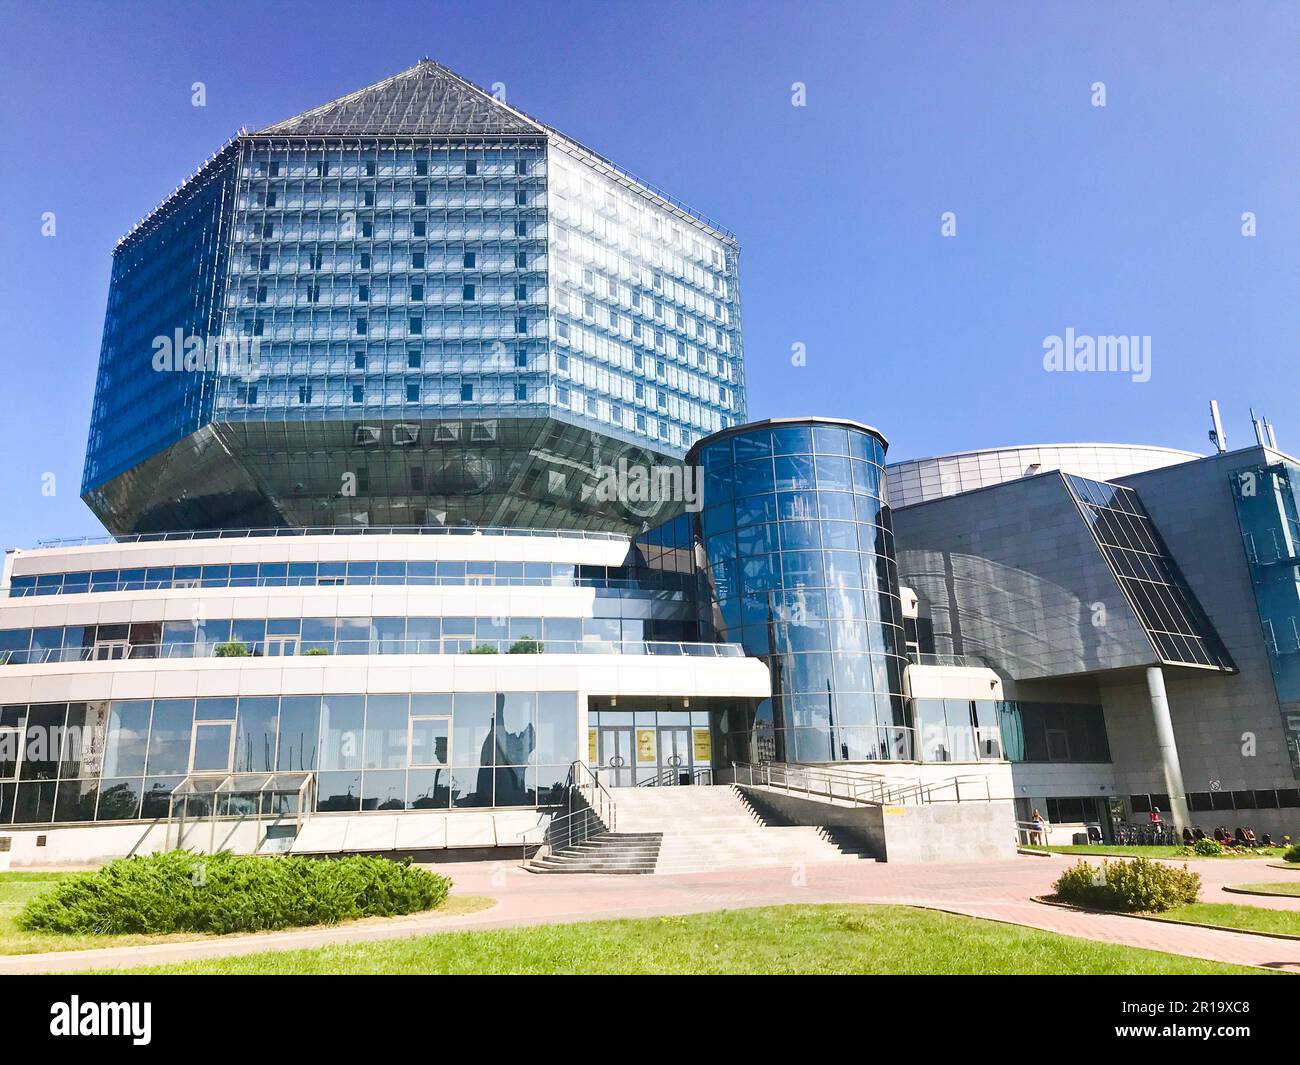 A large blue conceptual beautiful glass building in the shape of a diamond in a modern state-owned national library of Belarus. Republic of Belarus, M Stock Photo